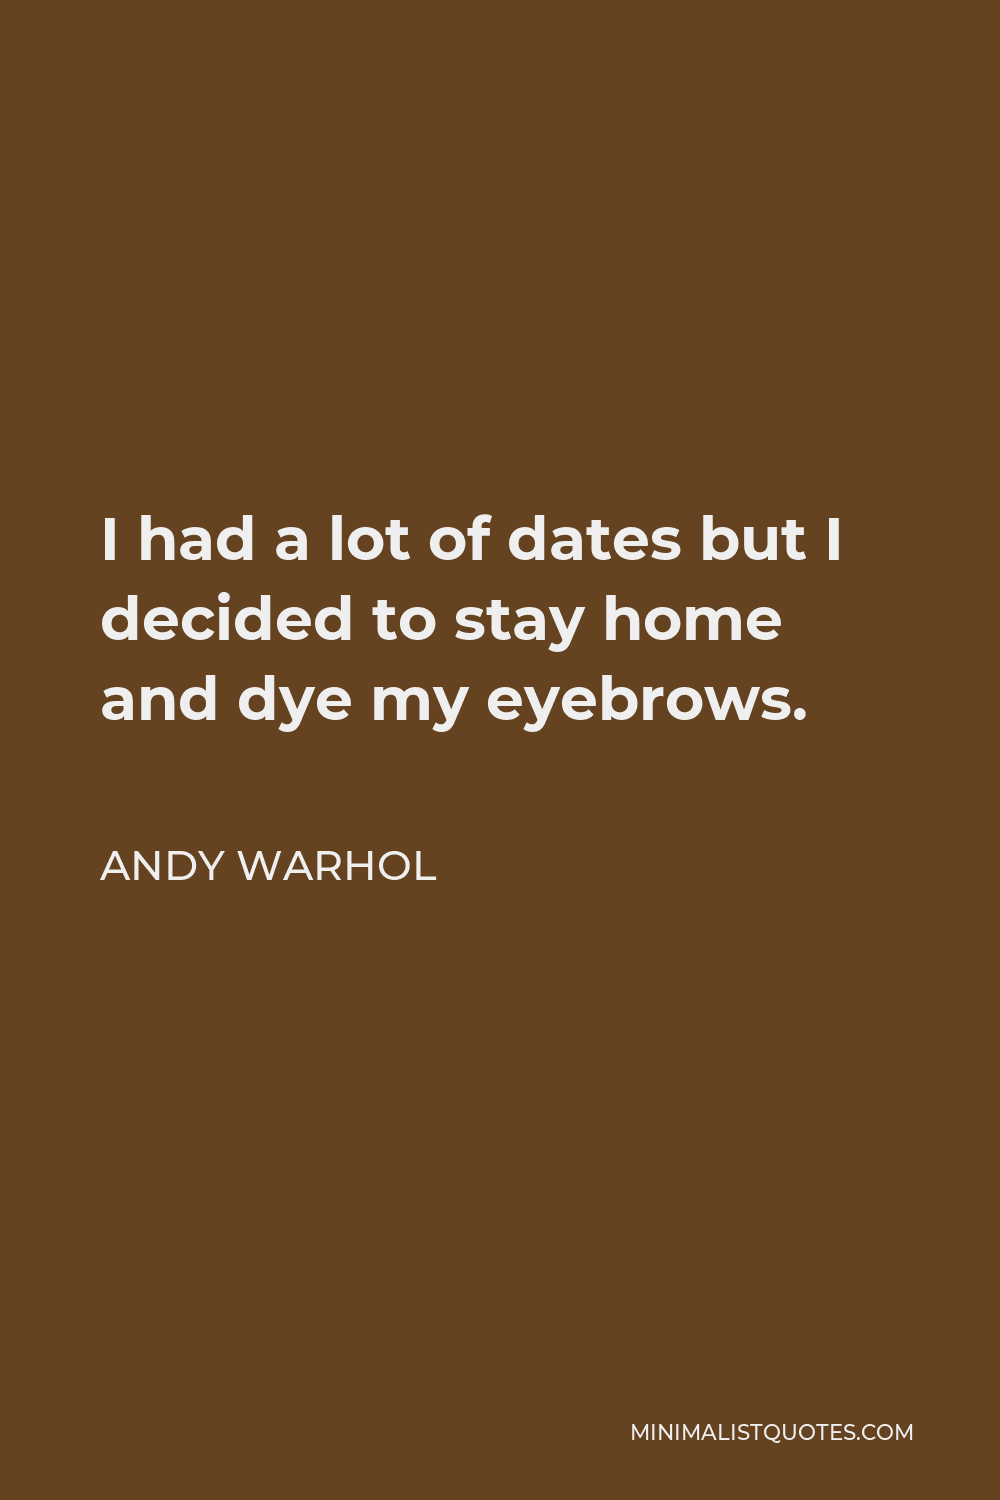 Andy Warhol Quote - I had a lot of dates but I decided to stay home and dye my eyebrows.